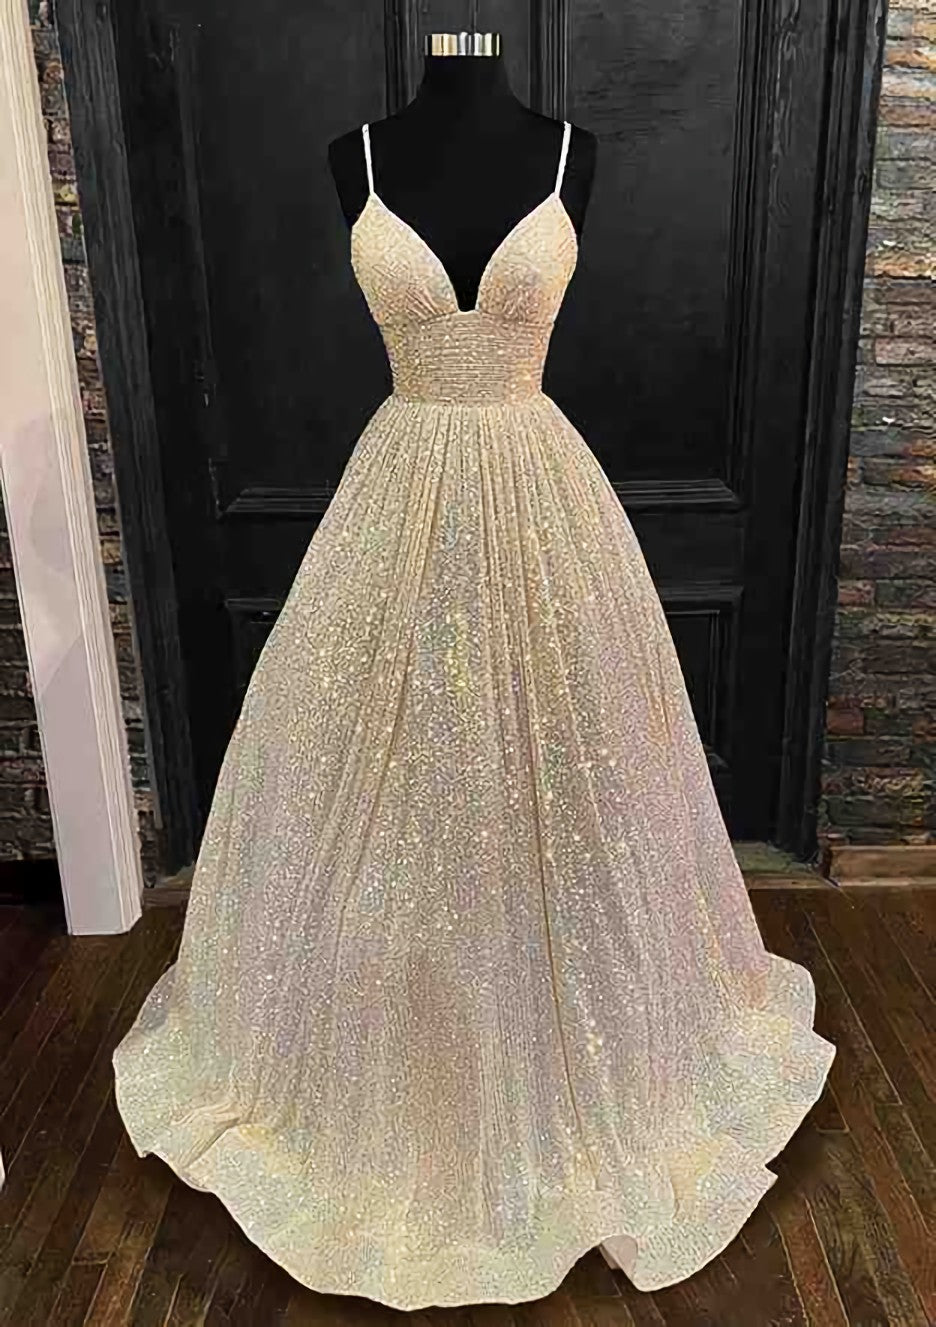 Princess A-line V Neck Spaghetti Straps Long/Floor-Length Sequined Corset Prom Dress With Pleated Gowns, Bridesmaides Dresses Summer